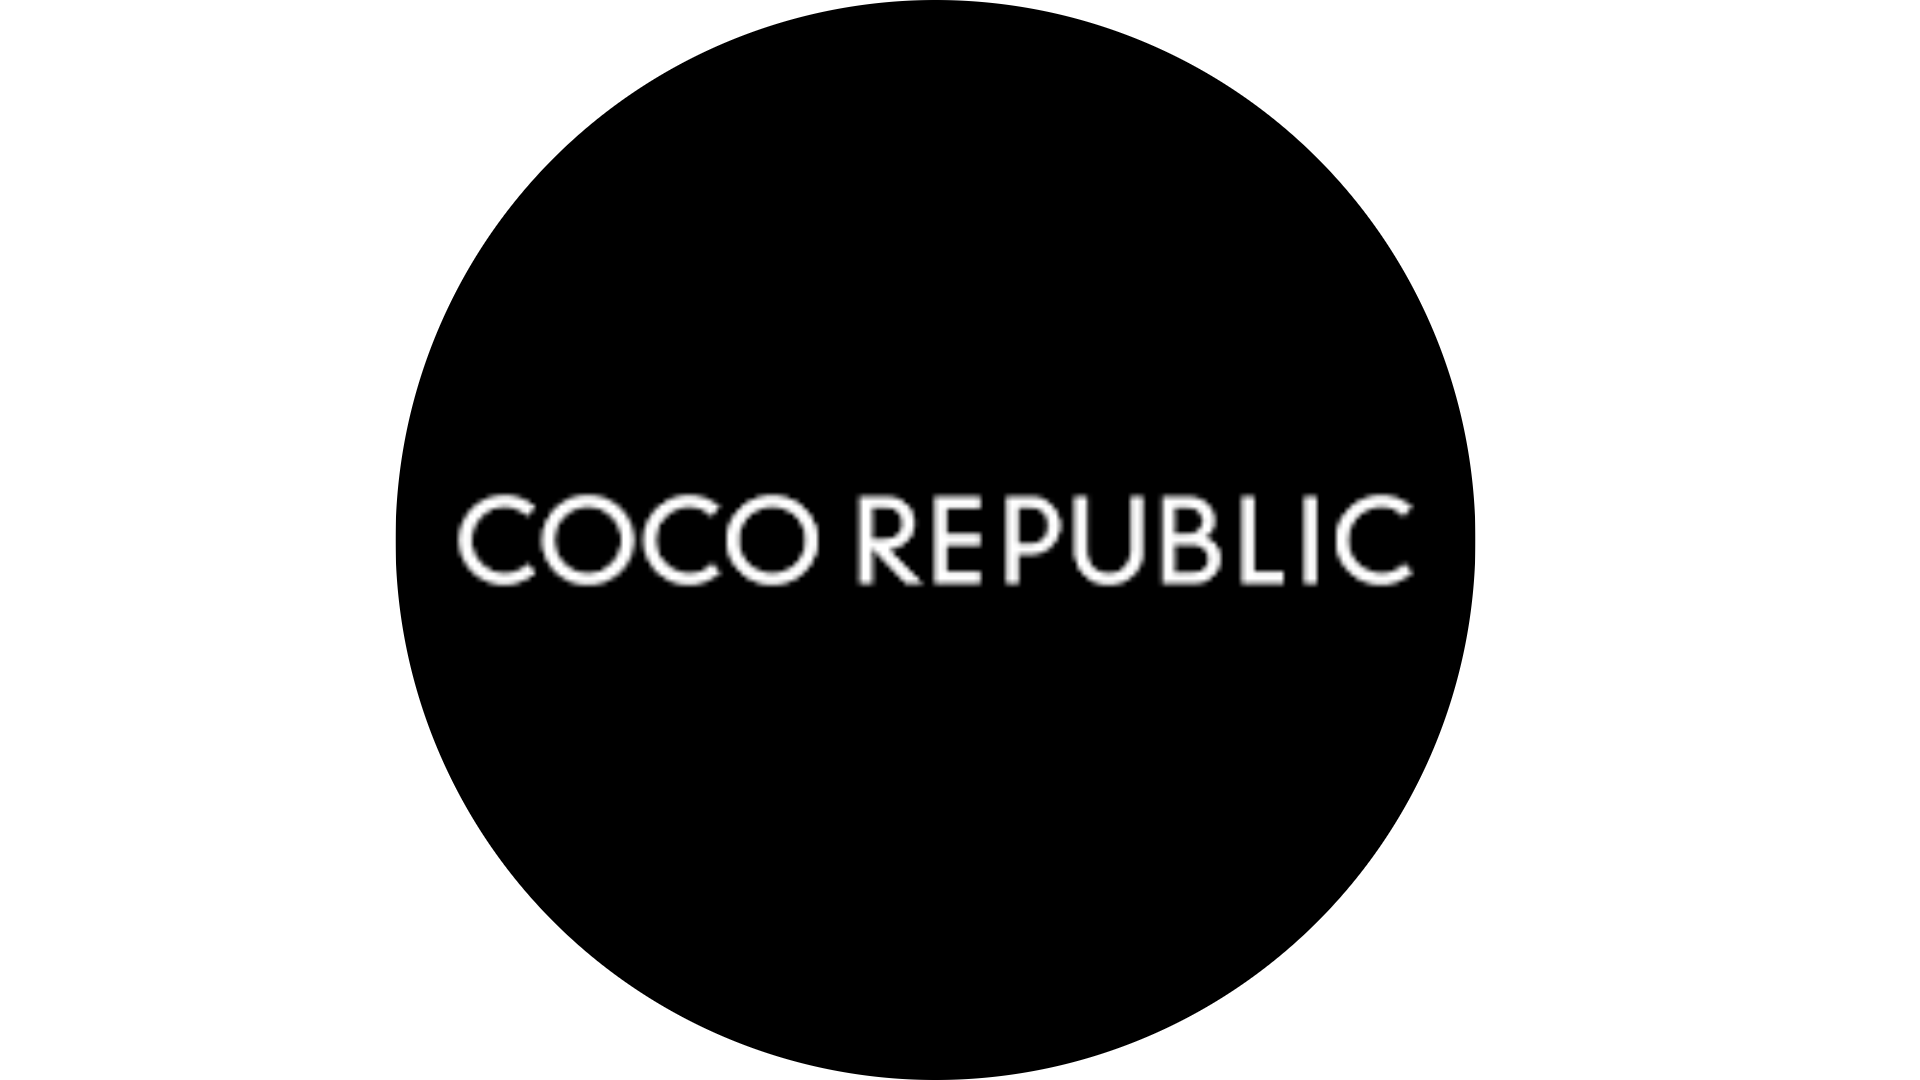 Get the Light Meets Dark style with Coco Republic